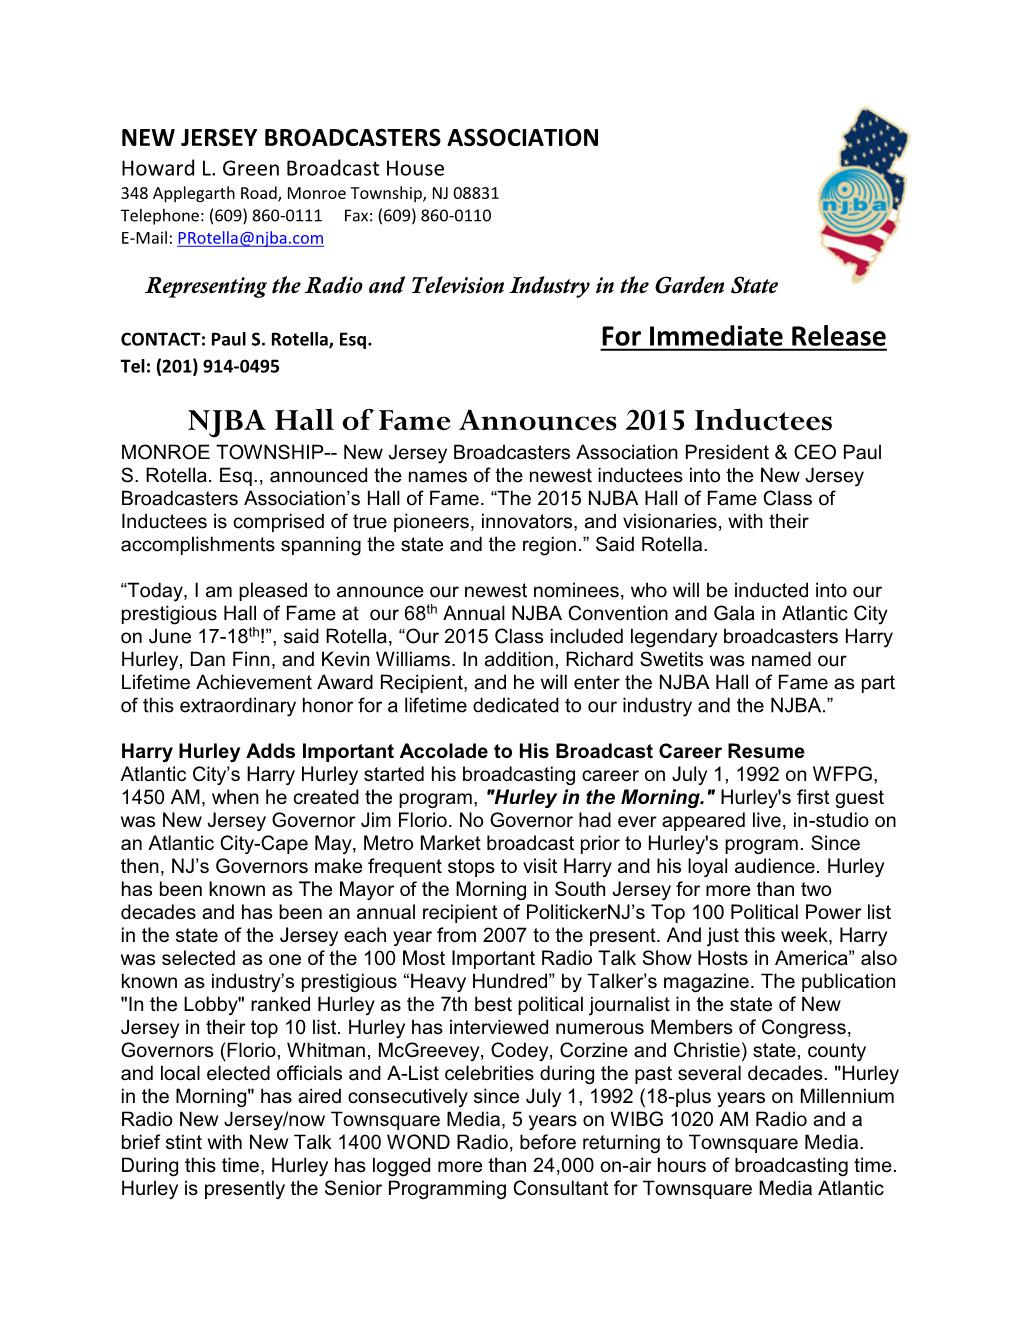 NJBA Hall of Fame Announces 2015 Inductees MONROE TOWNSHIP-- New Jersey Broadcasters Association President & CEO Paul S